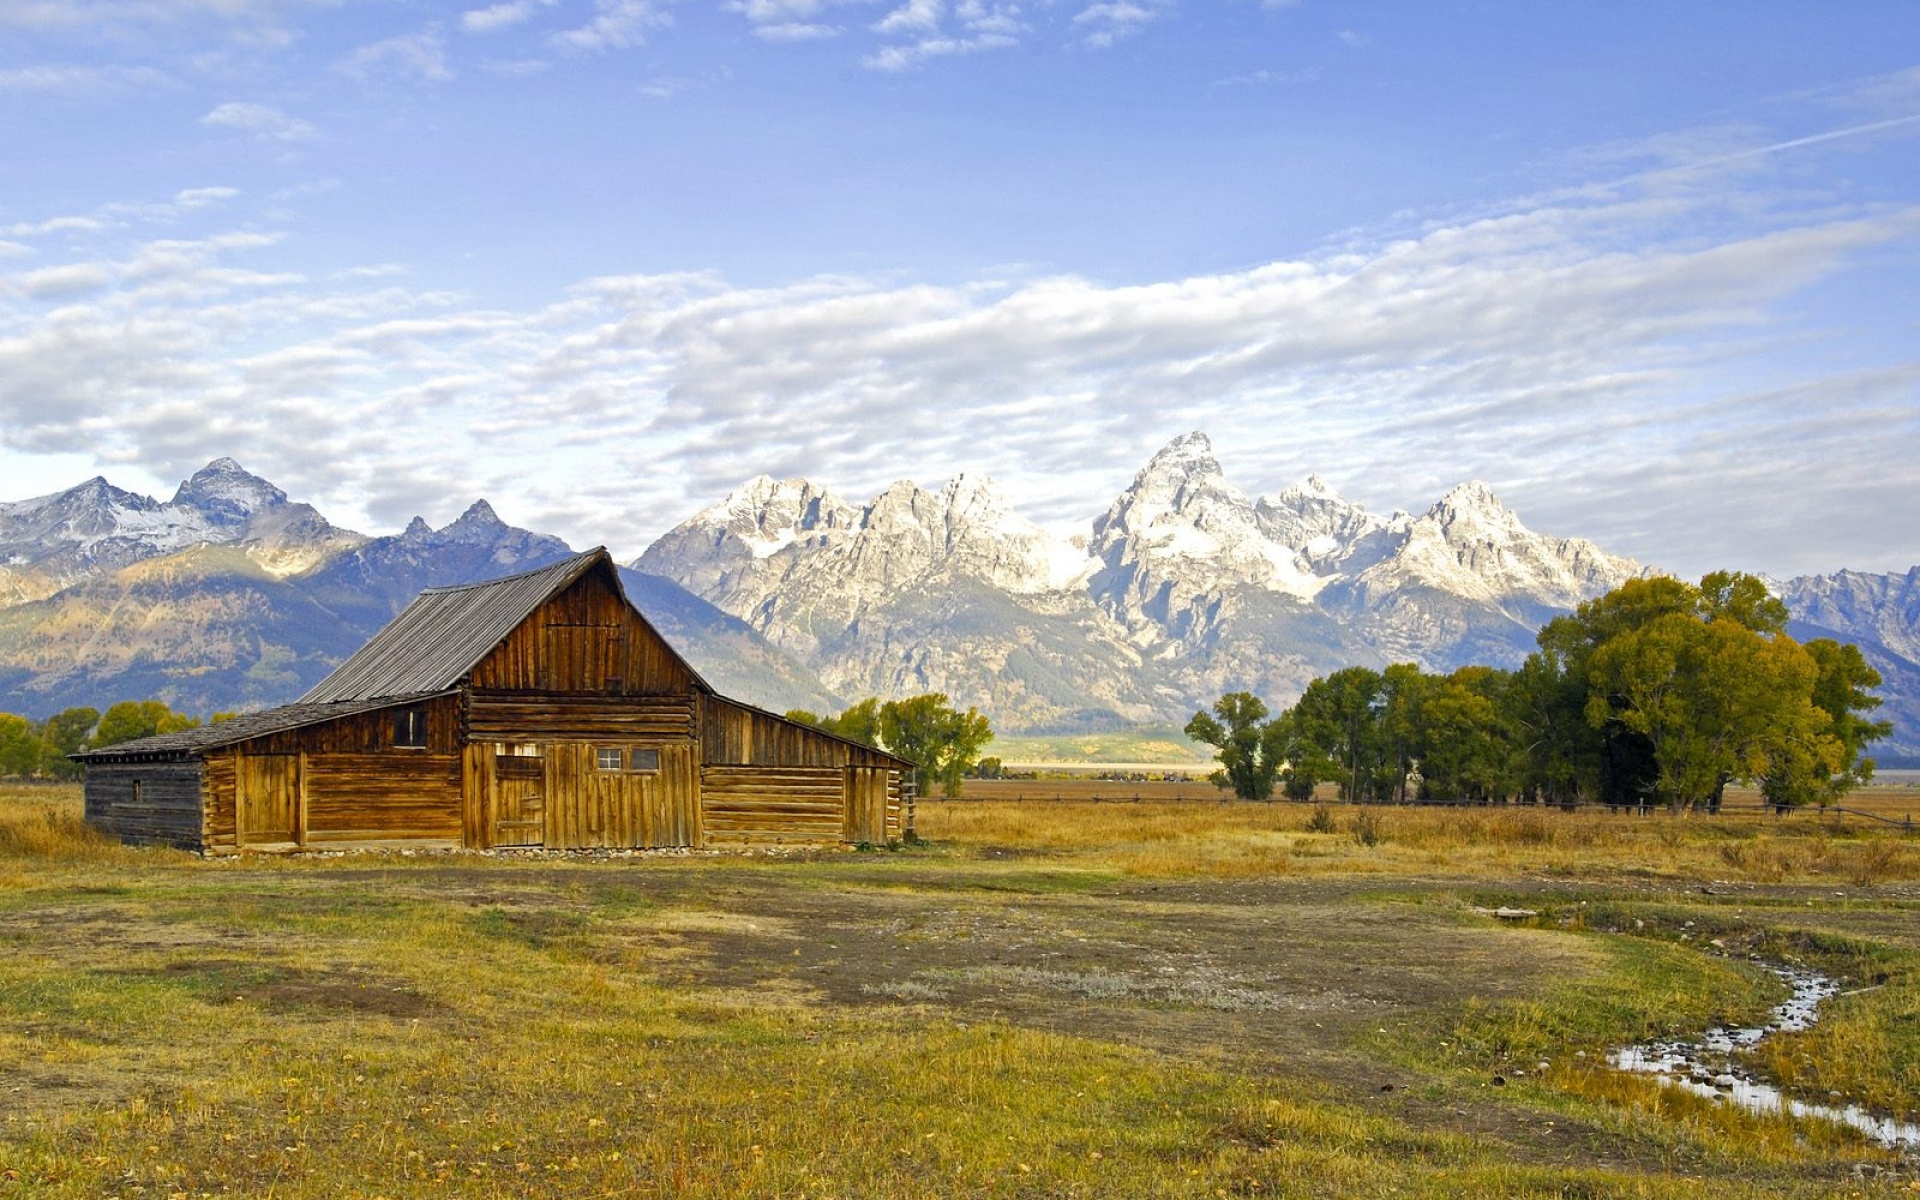 Scenery Wyoming Wallpaper House Wooden Stock Photos